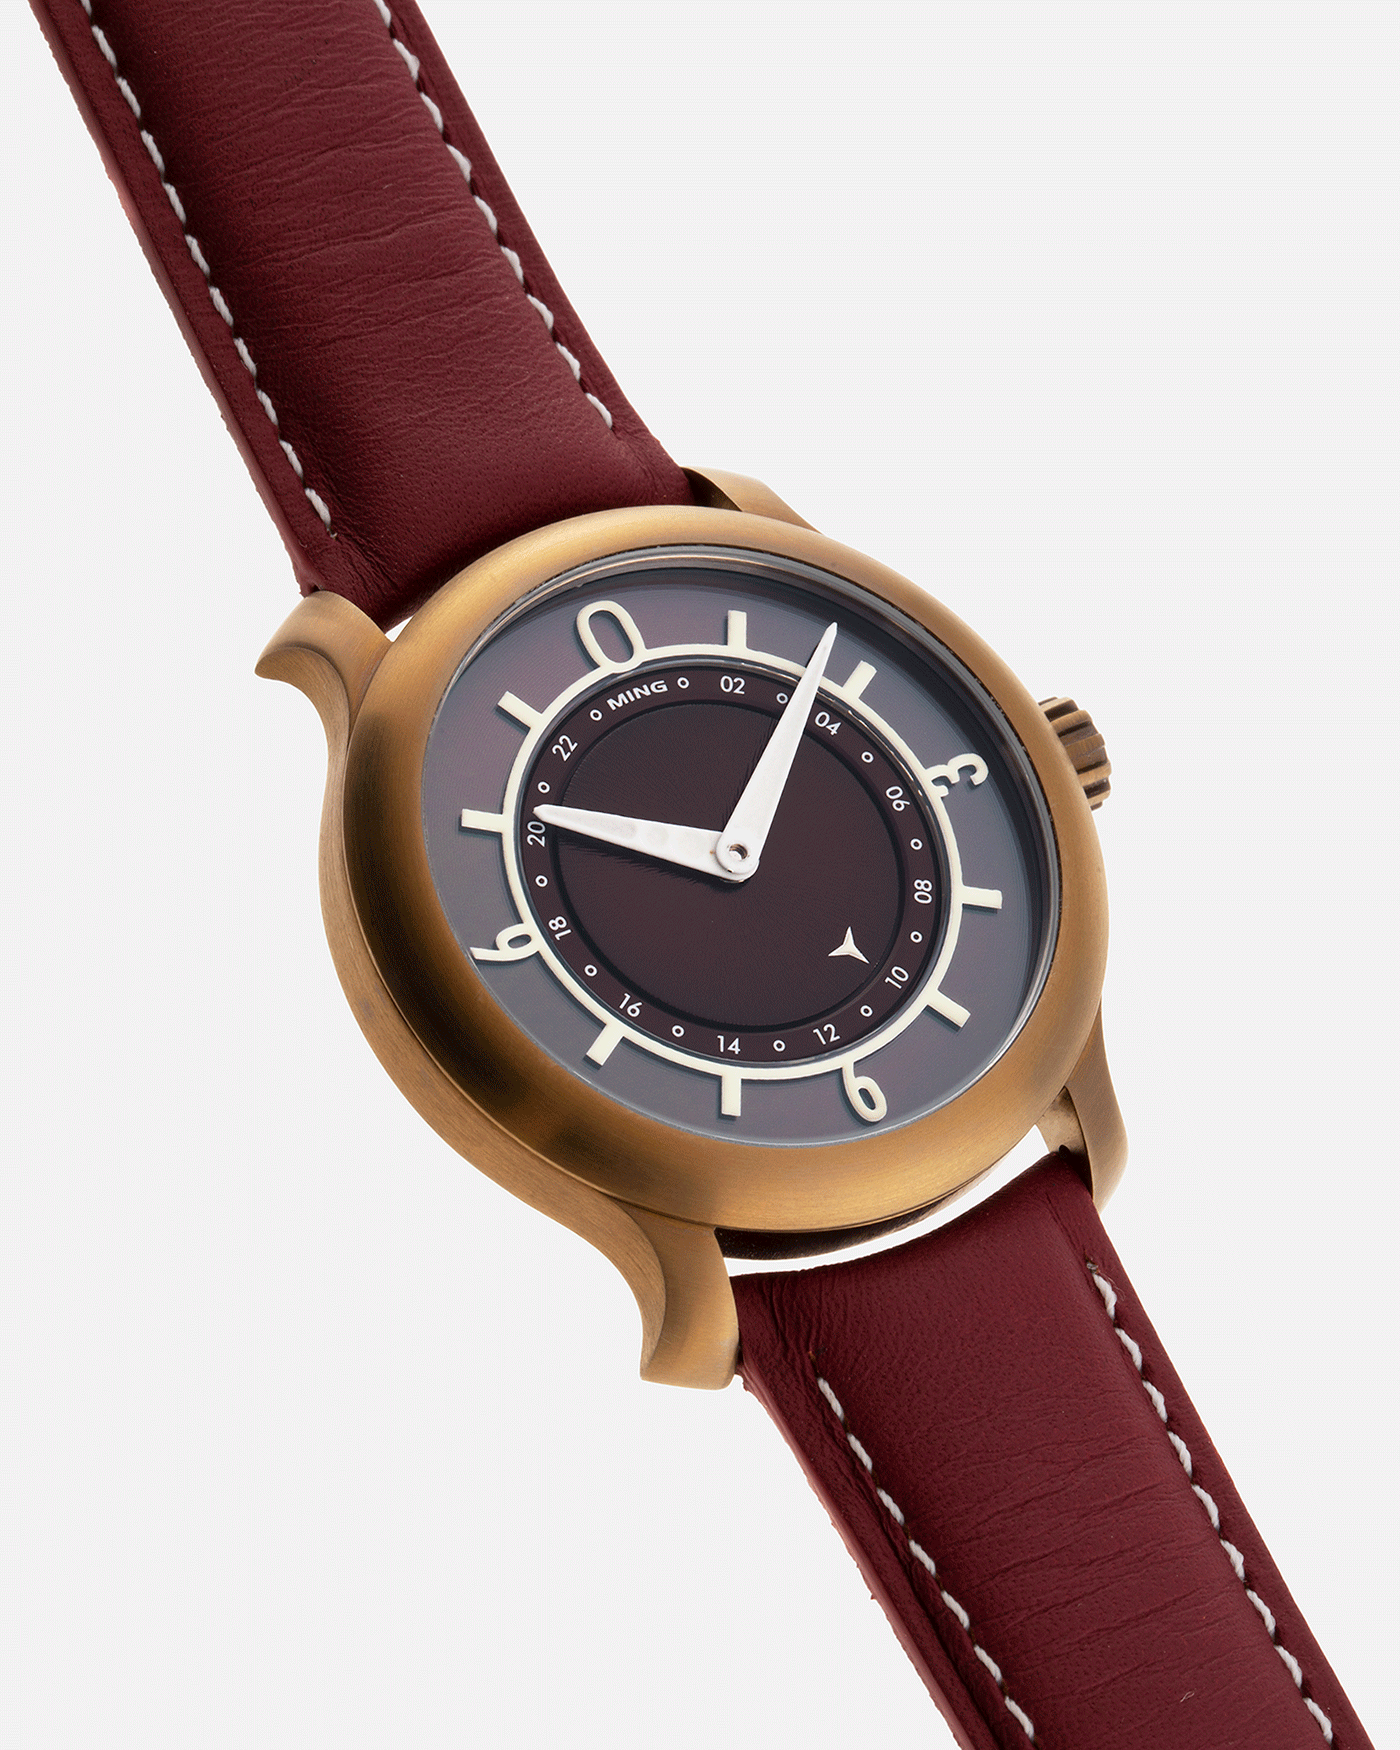 Brand: Ming Year: 2018 Model: 17.03 BB Edition Material: Anodised Grade 2 Titanium Movement: Self-Winding Sellita SW 330-1 Case Diameter: 38mm Strap: Ming Burgundy Smooth Calf by Jean Rousseau Paris and Matching Annodised Grade 2 Titanium Tang Buckle